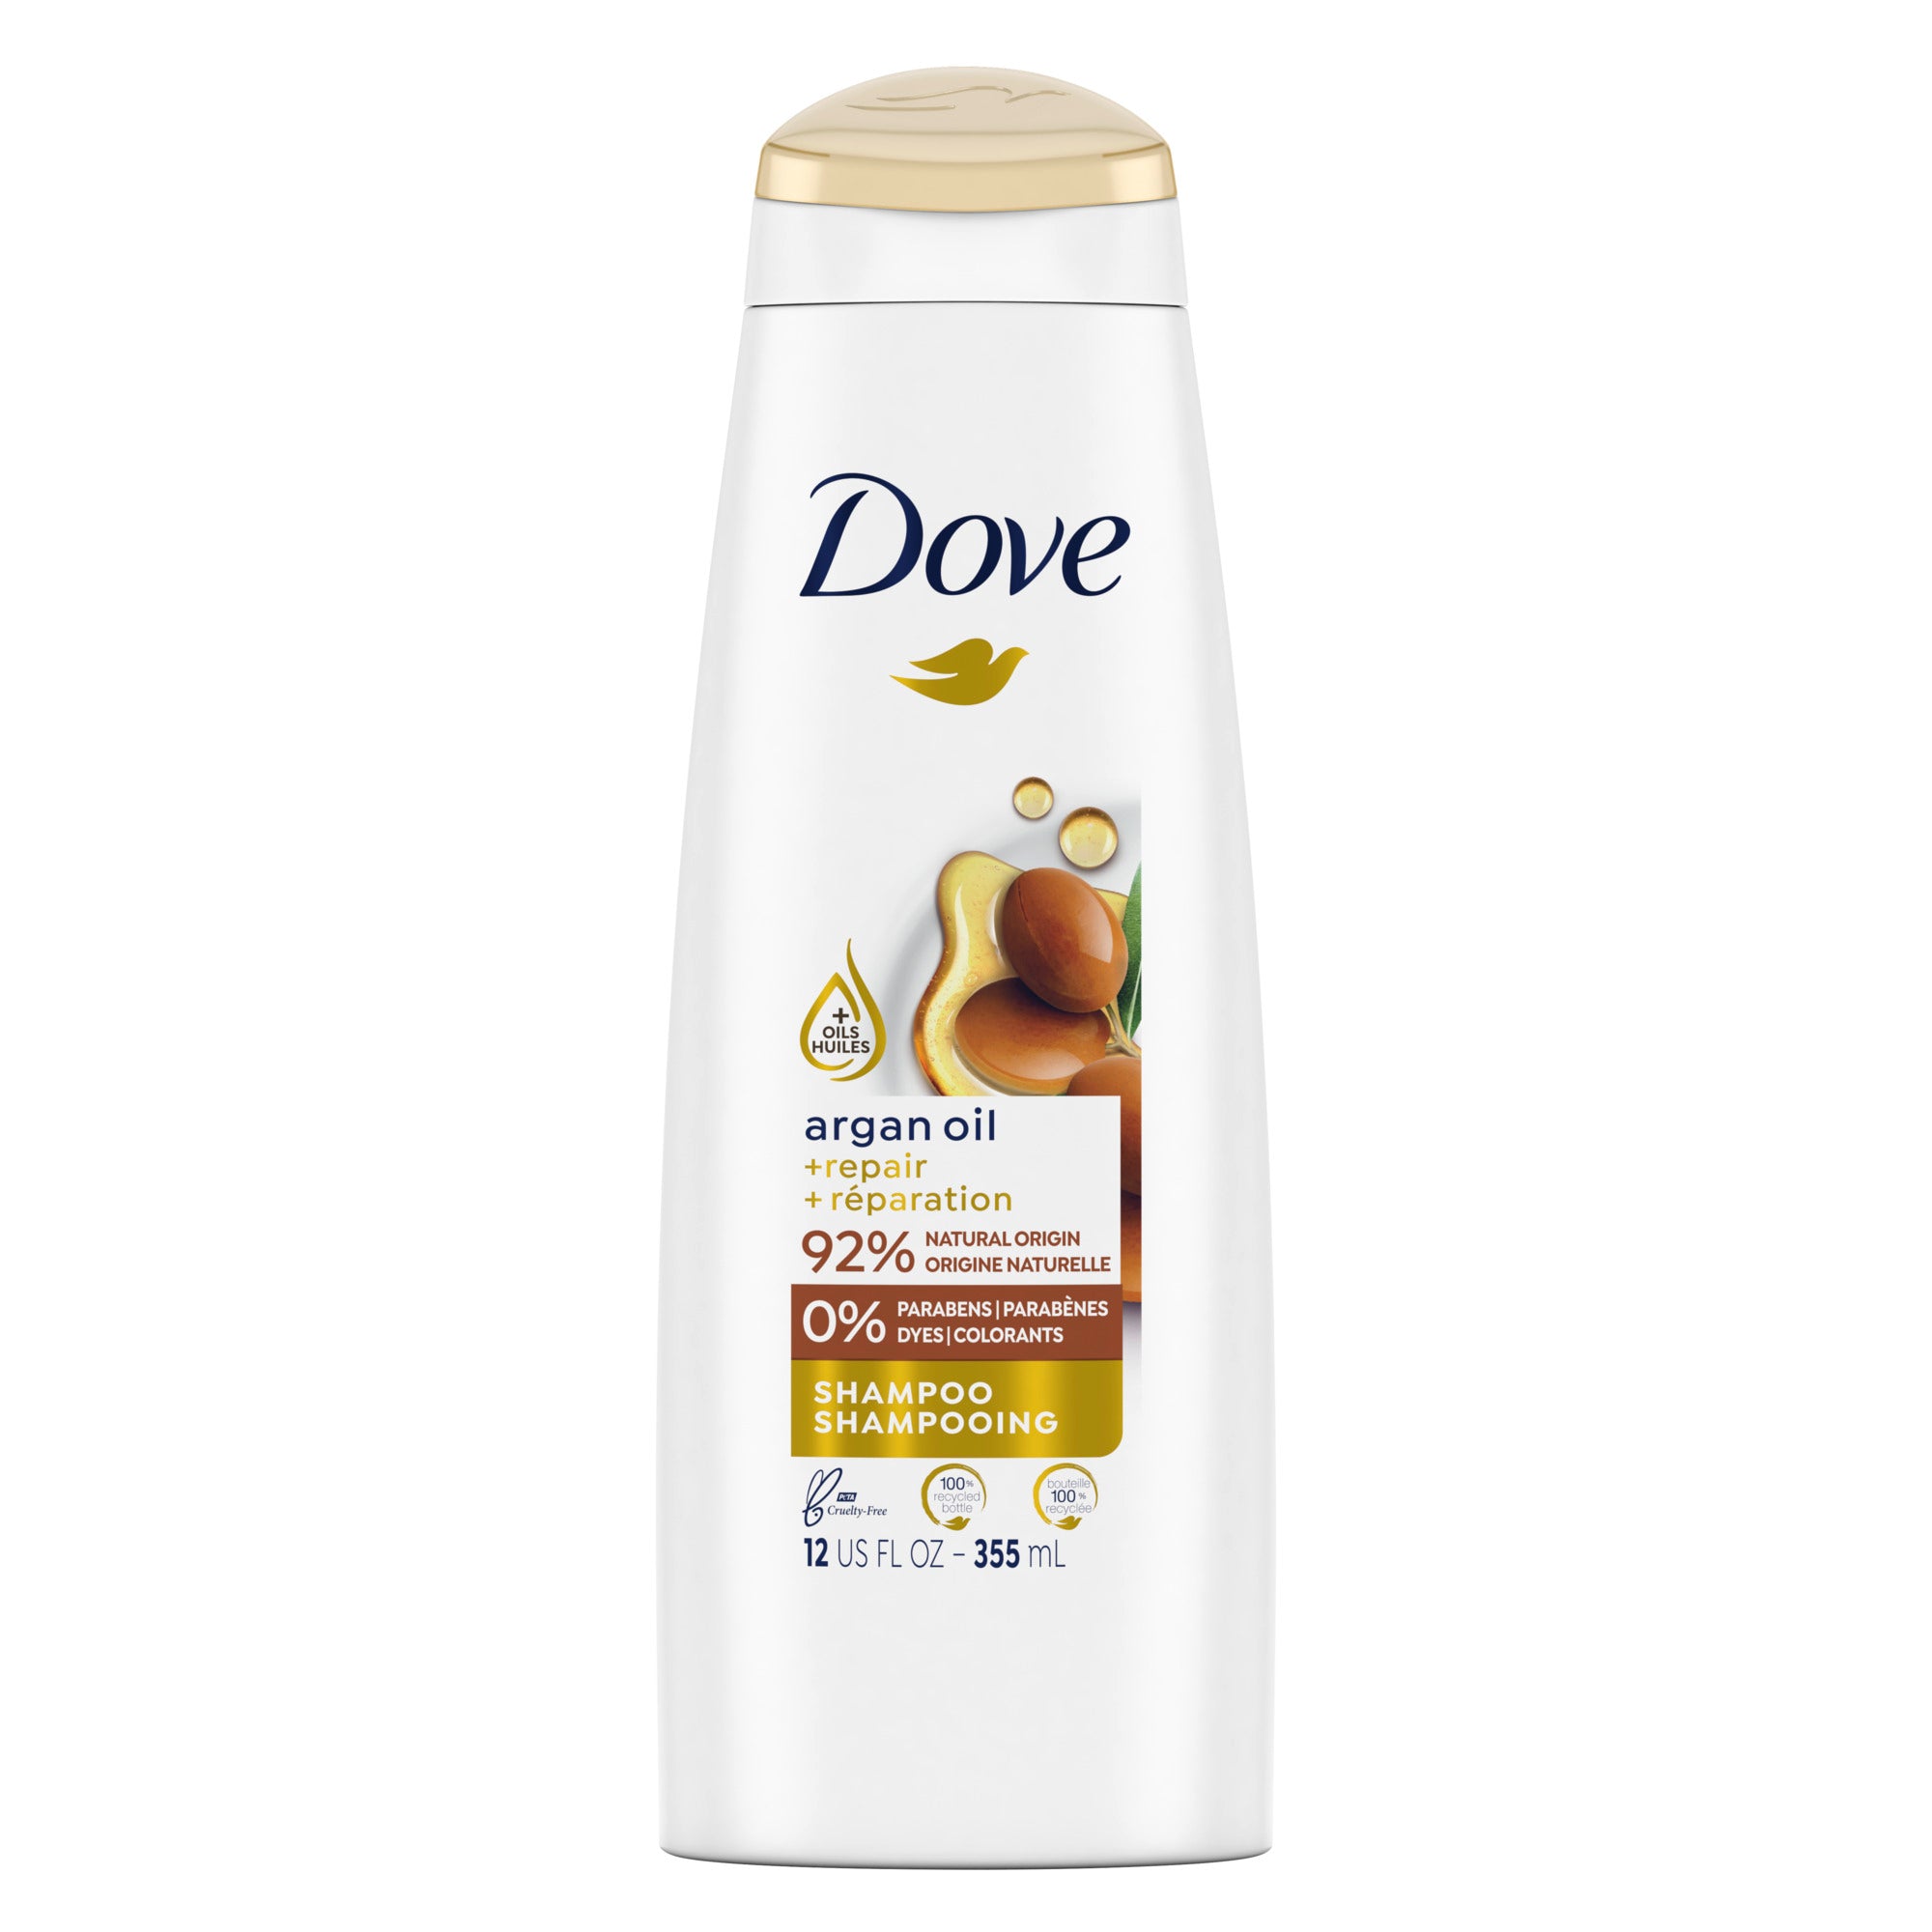 Showing the front angle view of the Dove Argan Oil + Damage Repair Shampoo 355mL product.